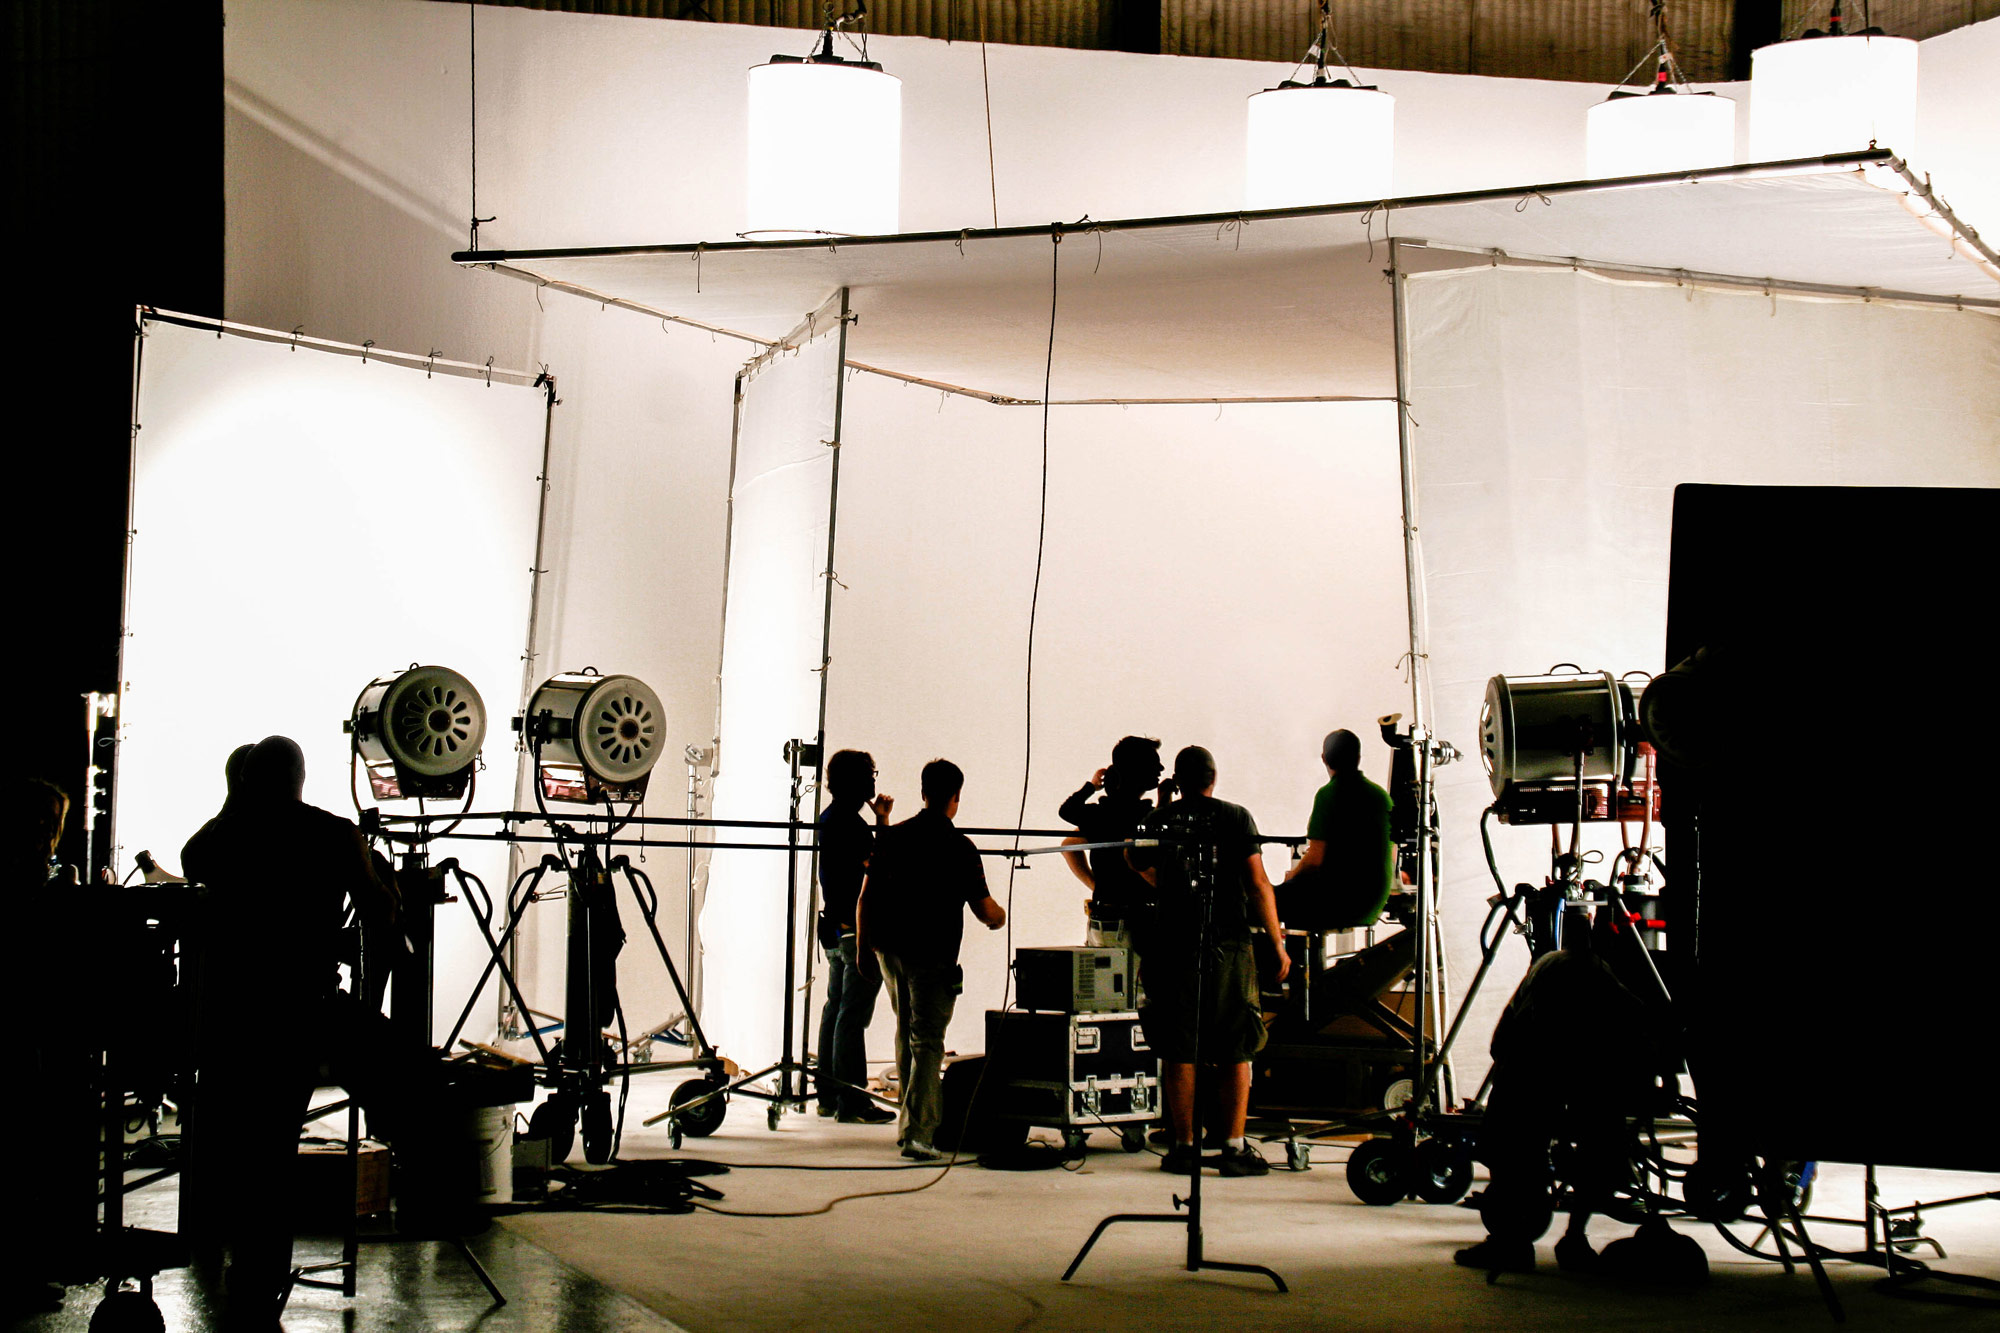 Film crew in production hall with camera